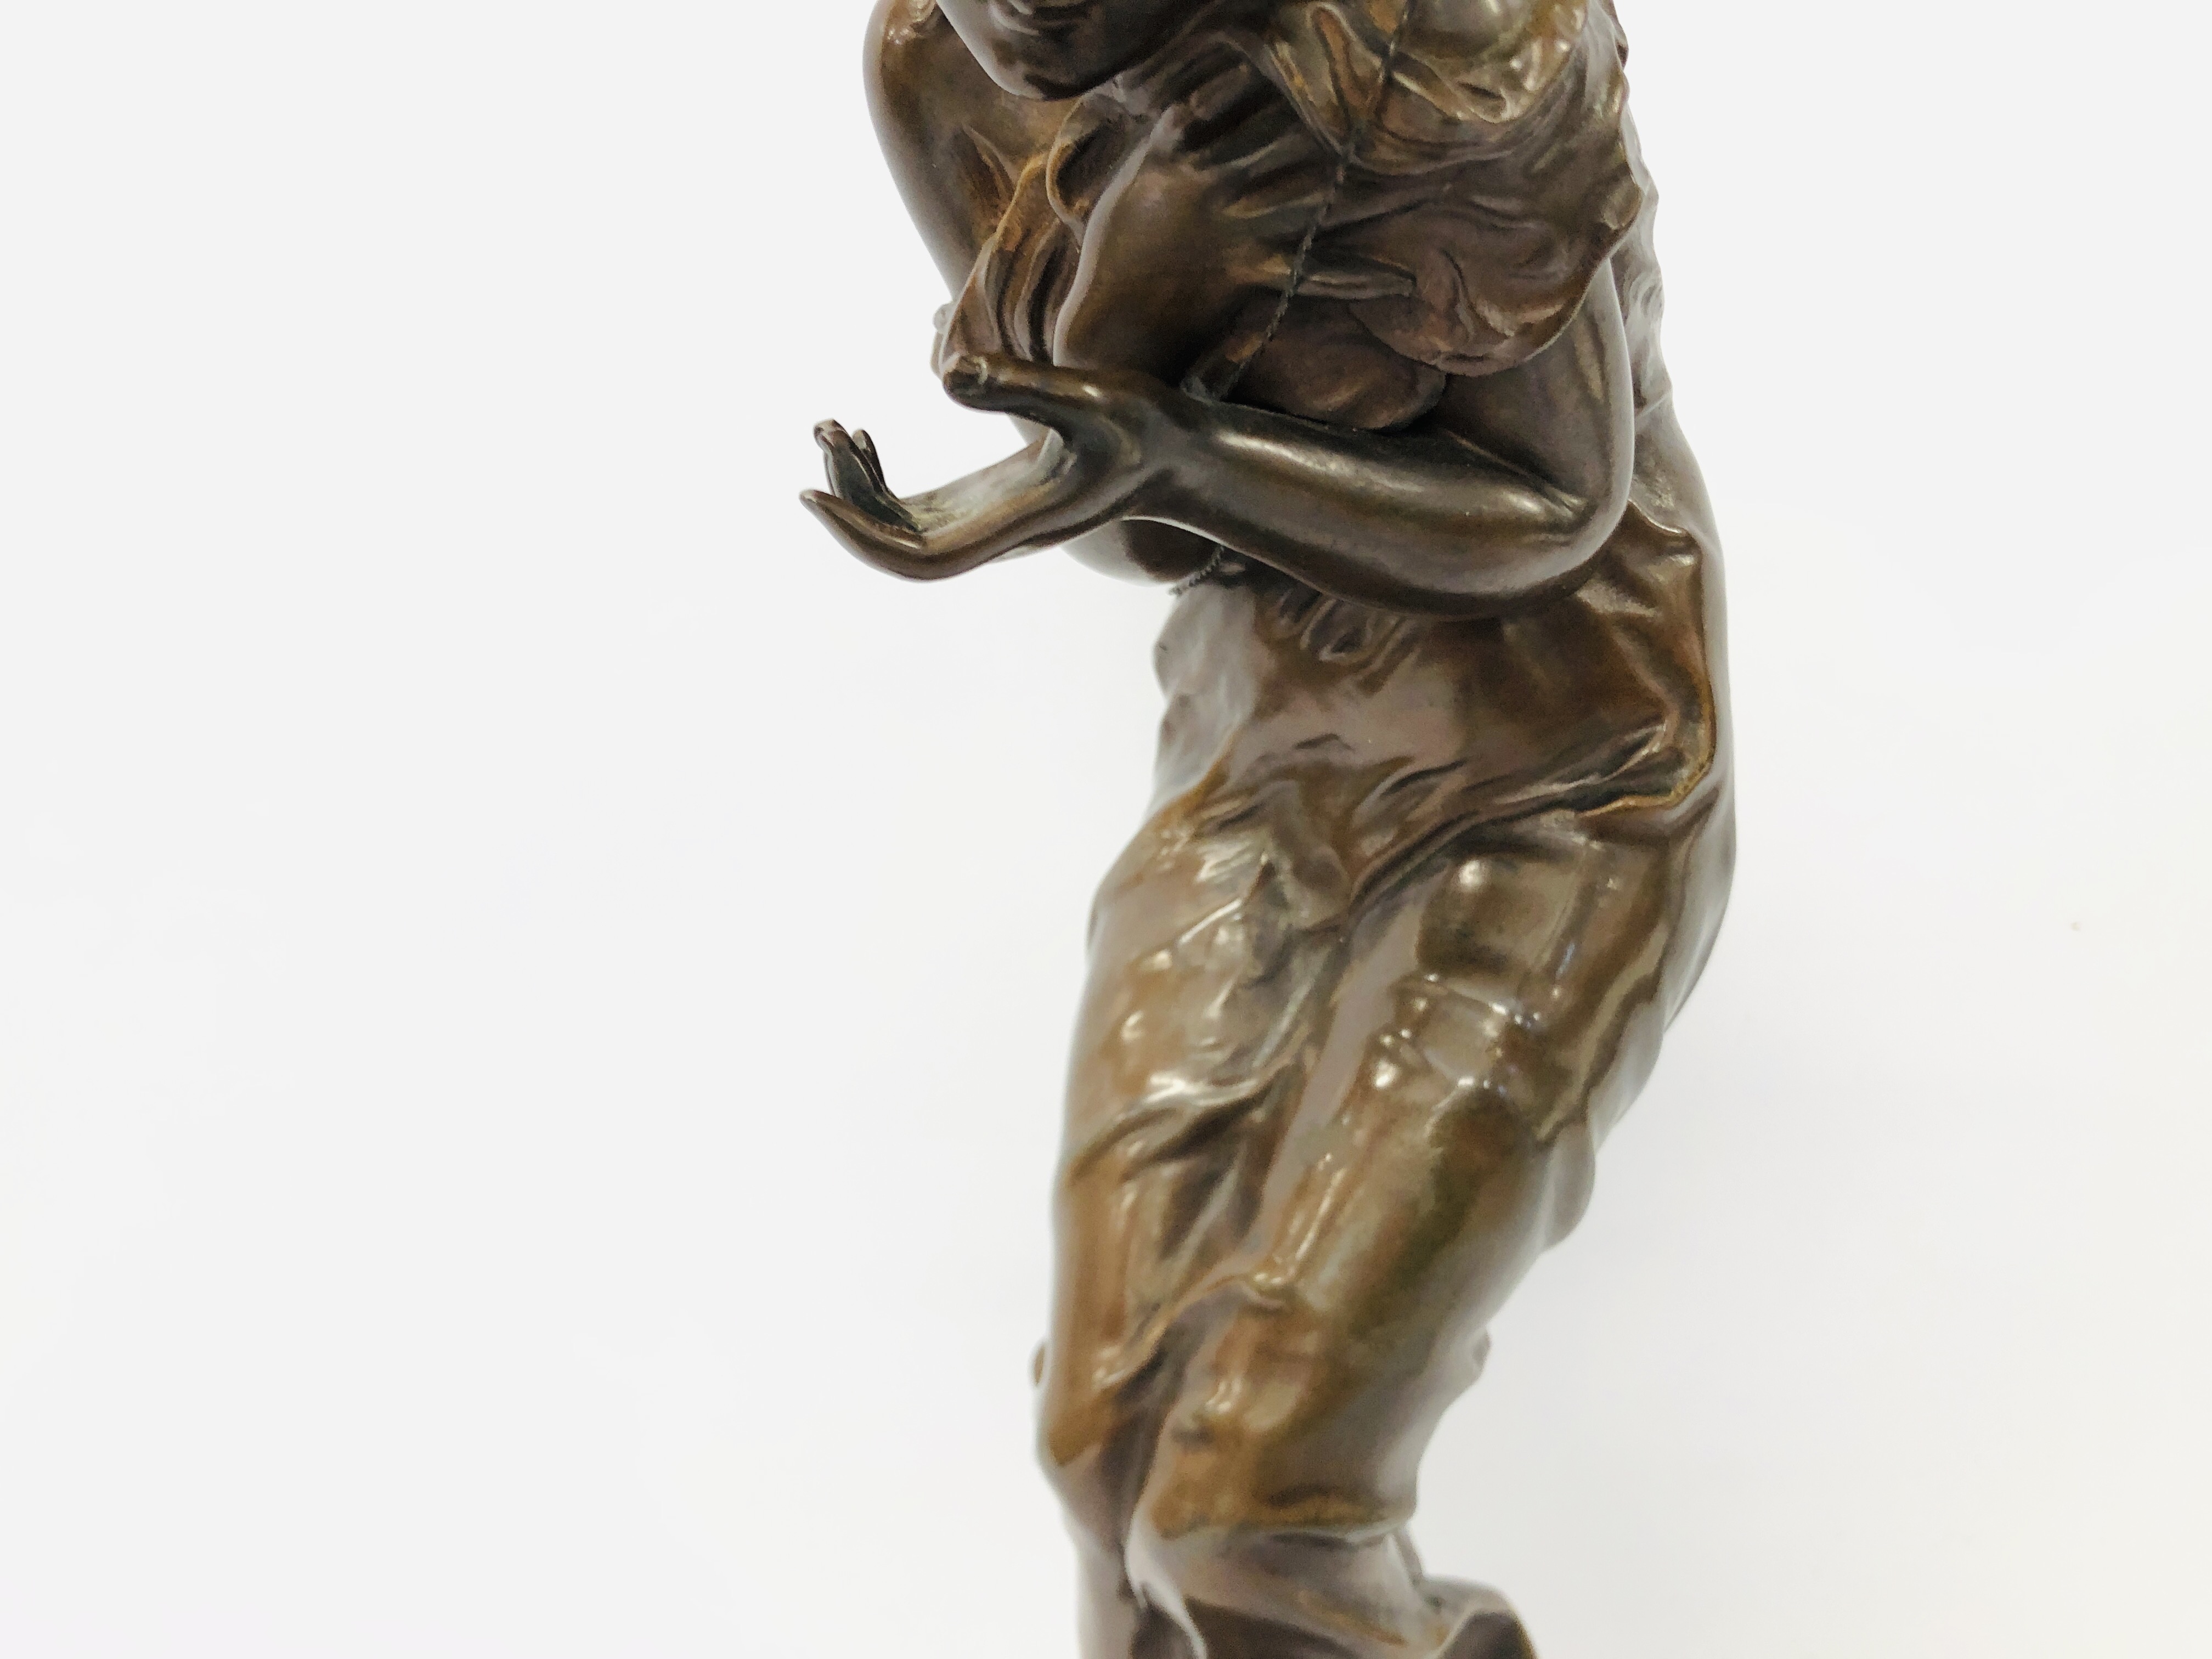 A FRENCH BRONZE OF A FEMALE LUTE PLAYER, THE BASE INSCRIBED "STELLA", - Image 6 of 10